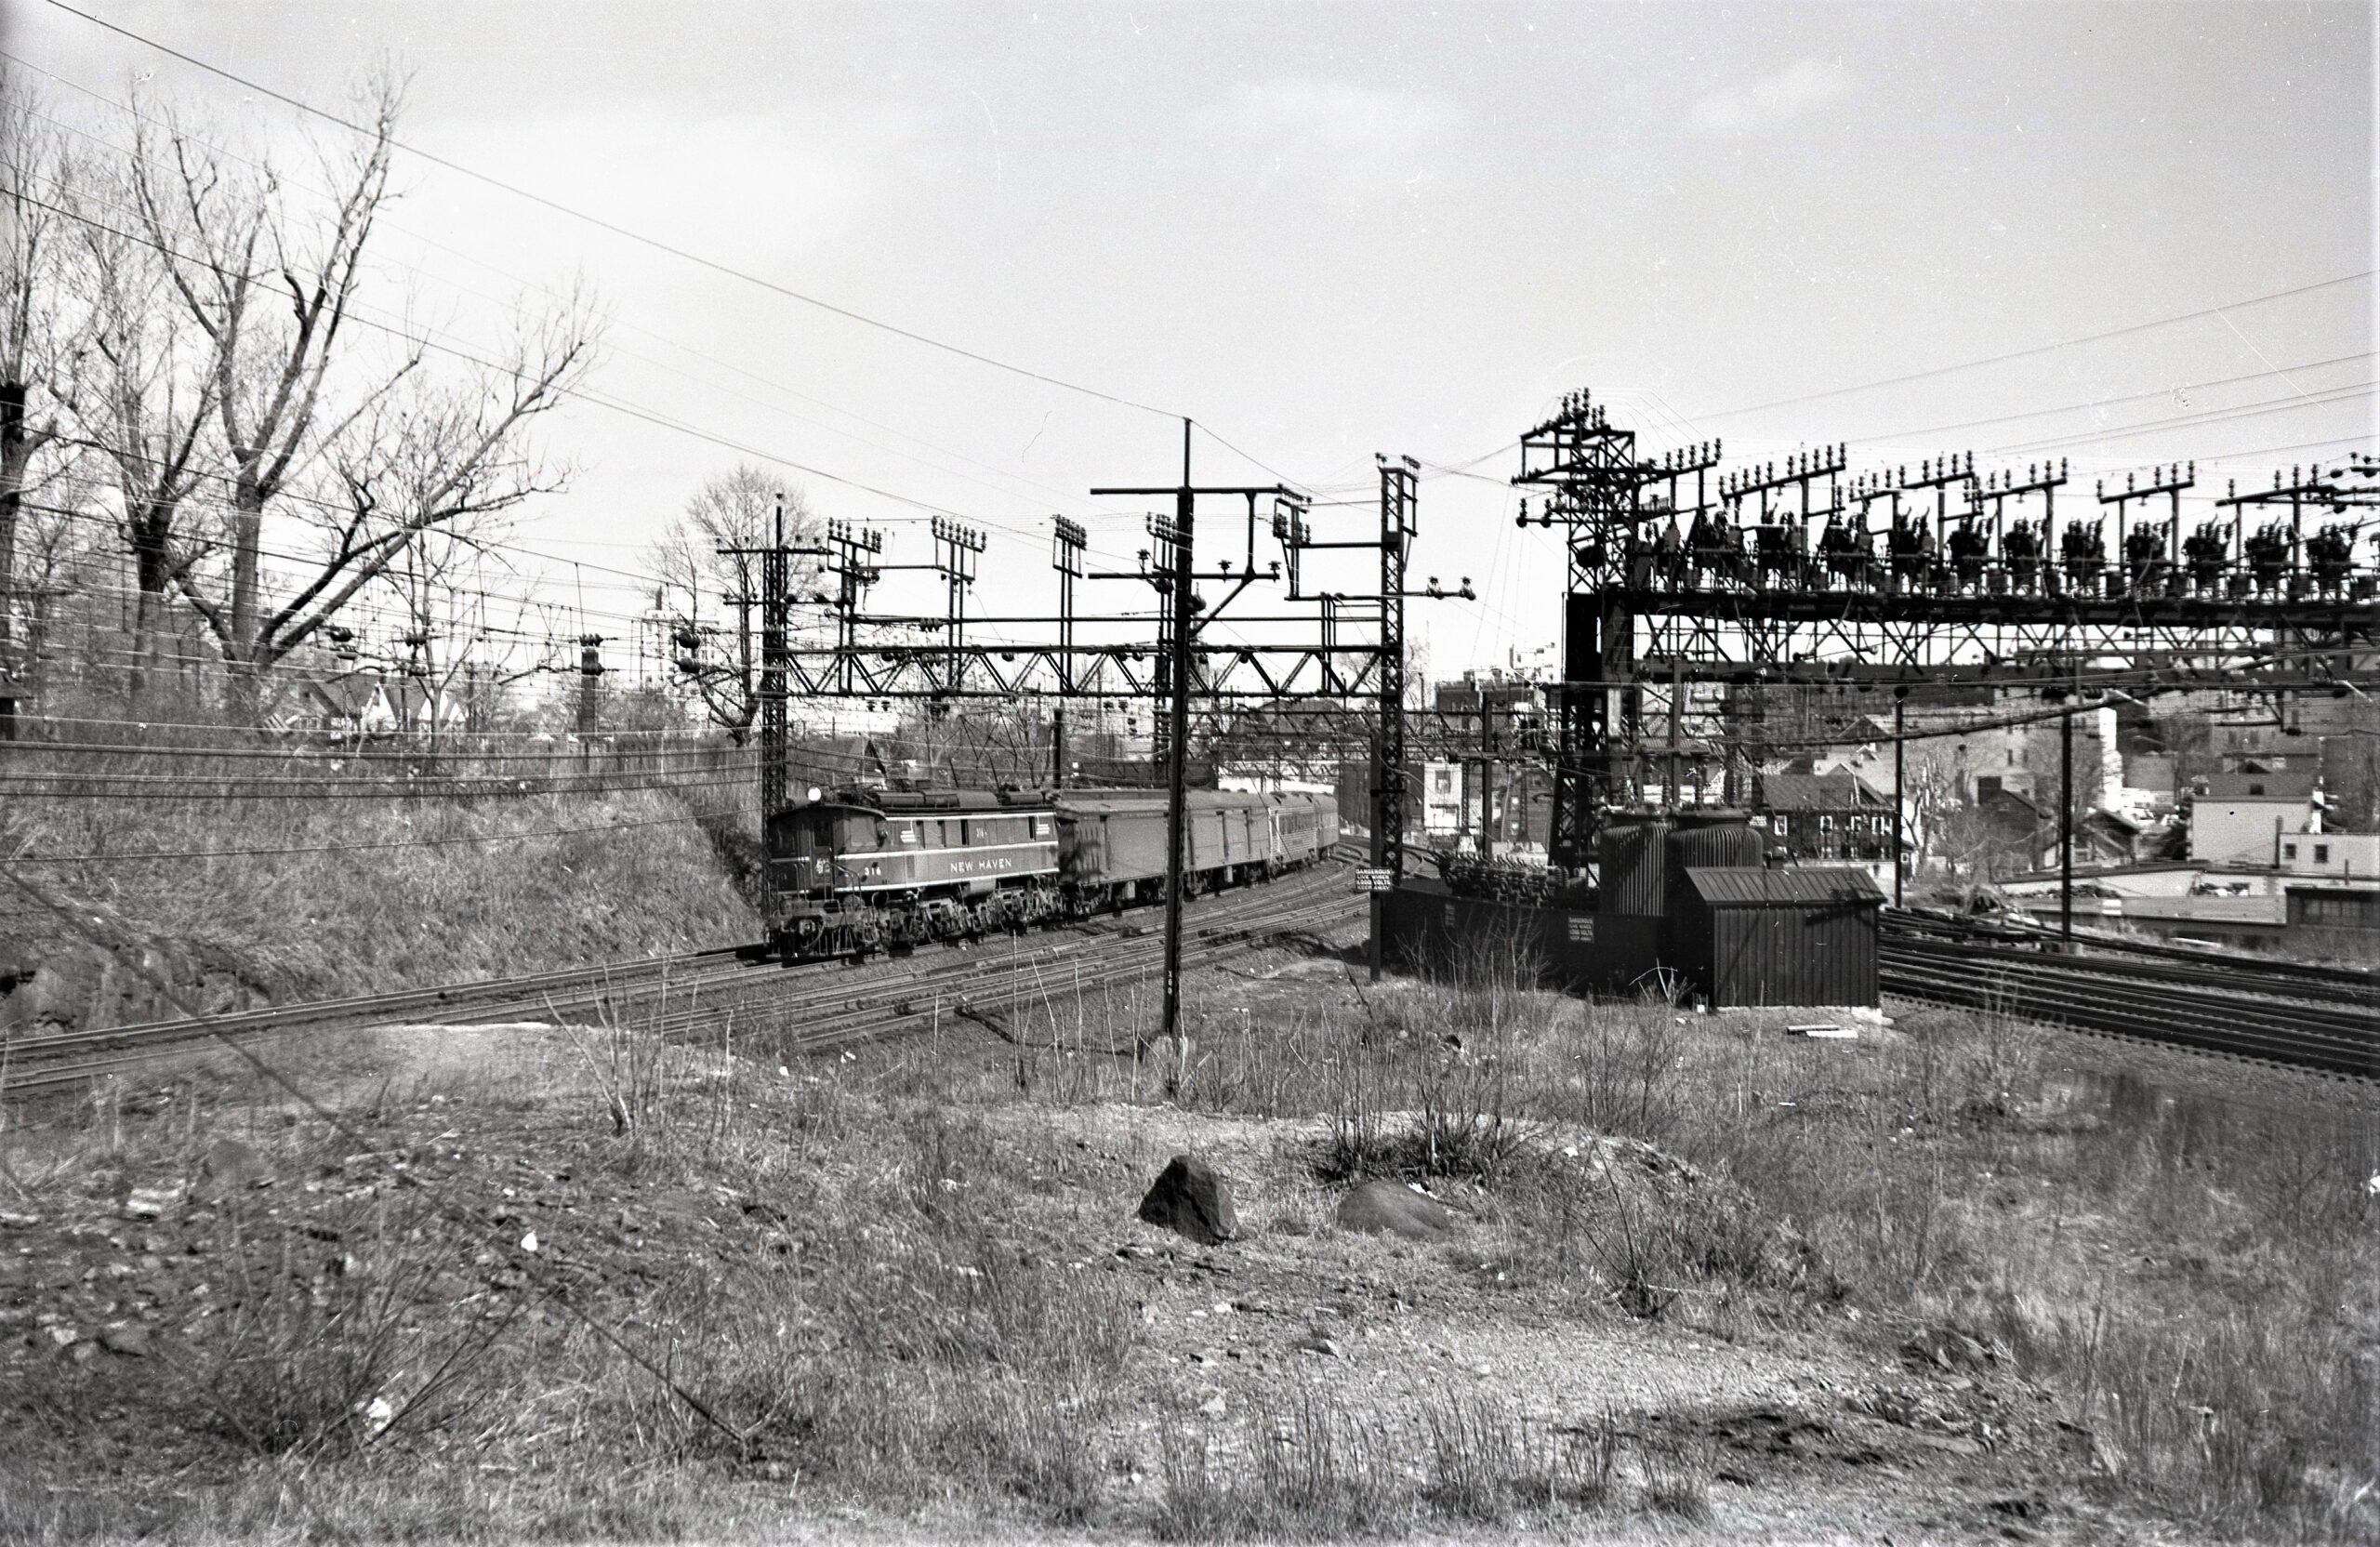 New York New Haven and Hartford Railroad | New Haven | New Rochelle New York | Electric Motor Class #EP-3 # 316 | Train 75 | March 31, 1953 | Fielding Lew Bowman phtograph